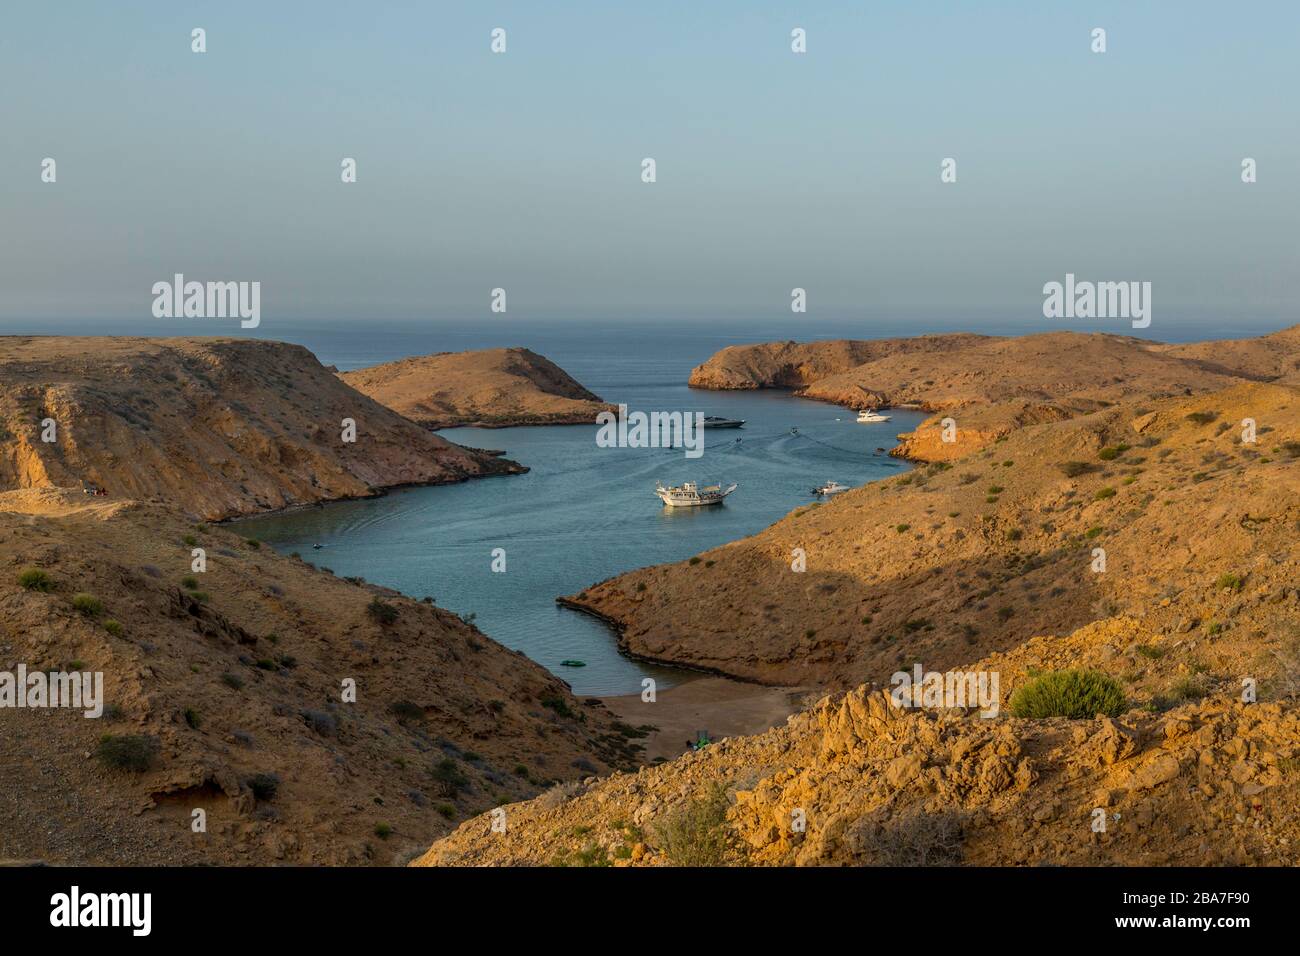 A bay at Bander Al Khayran, or Bander Al Khairan, just east of Muscat in Oman. Pleasure boats can be seen in the bay. Stock Photo